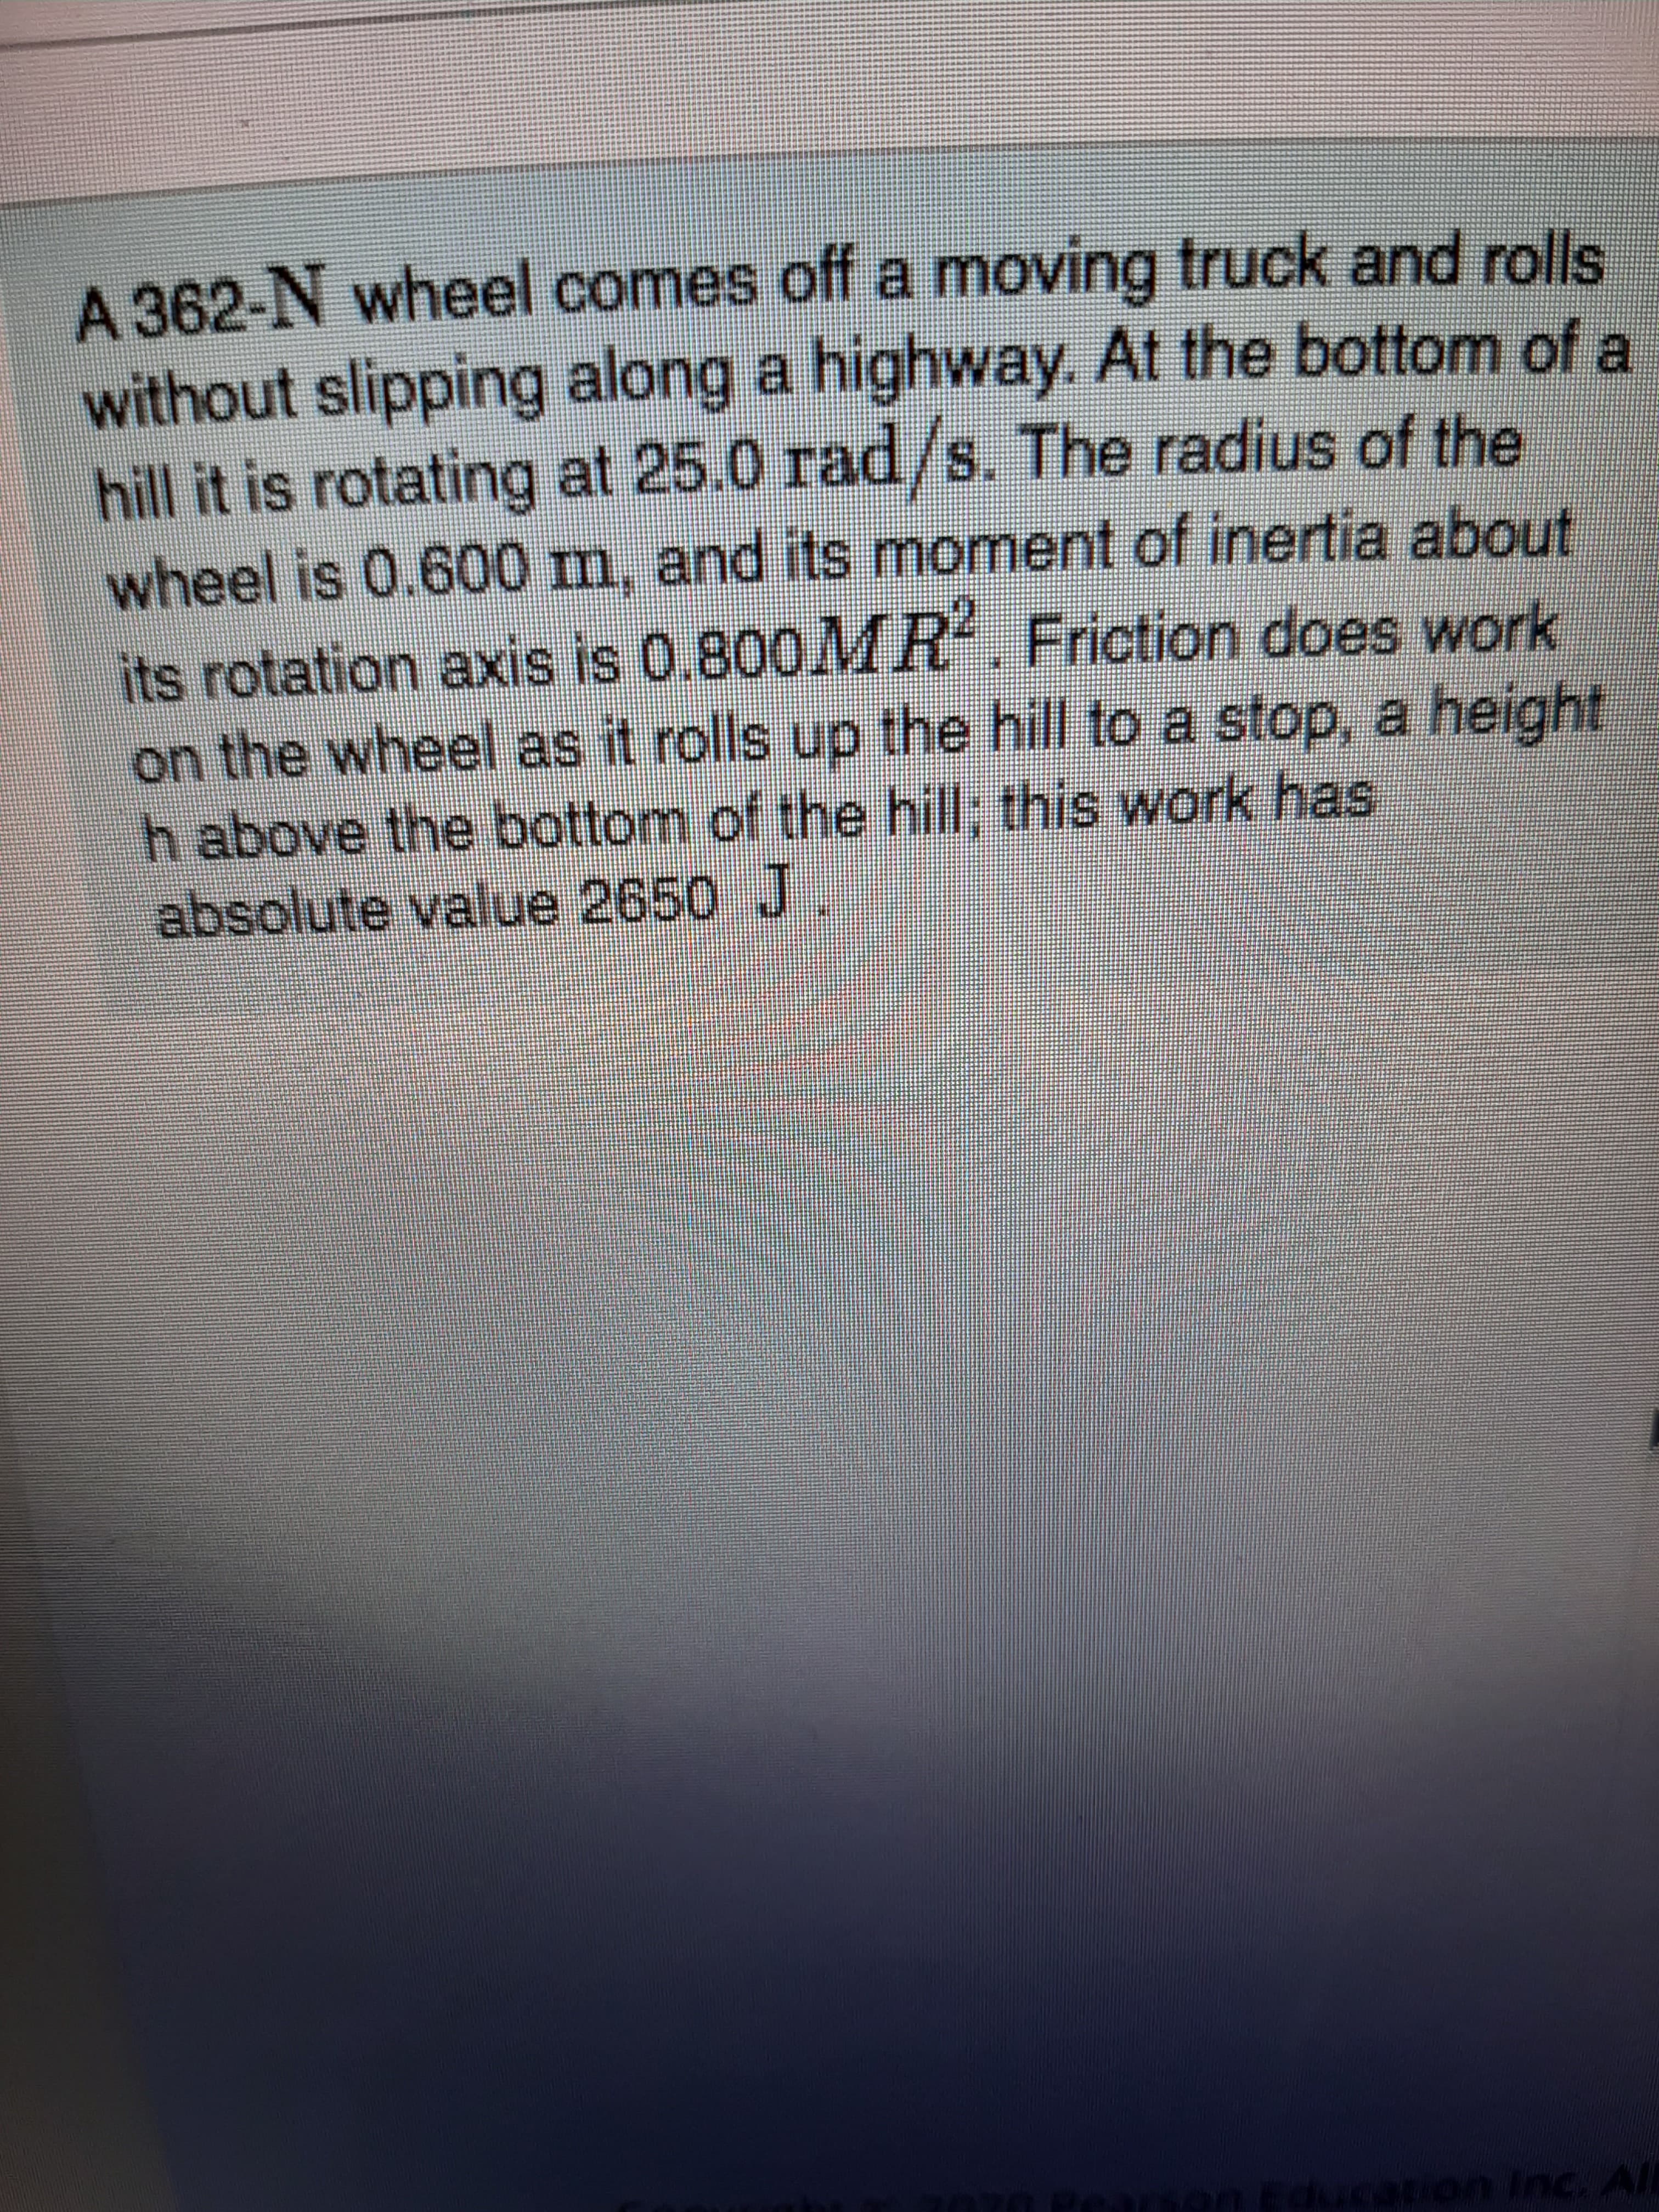 A 362-N wheel comes off a moving truck and rolls
without slipping along a highway. At the bottom of a
hill it is rotating at 25.0 rad/s. The radius of the
wheel is 0.600 m, and its moment of inertia about
its rotation axis is 0.800MR Friction does work
on the wheel as it rolls up the hill to a stop, a height
h above the bottom of the hill, this work has
absolute value 2650 J
0 Pearsen Education Inc. All
